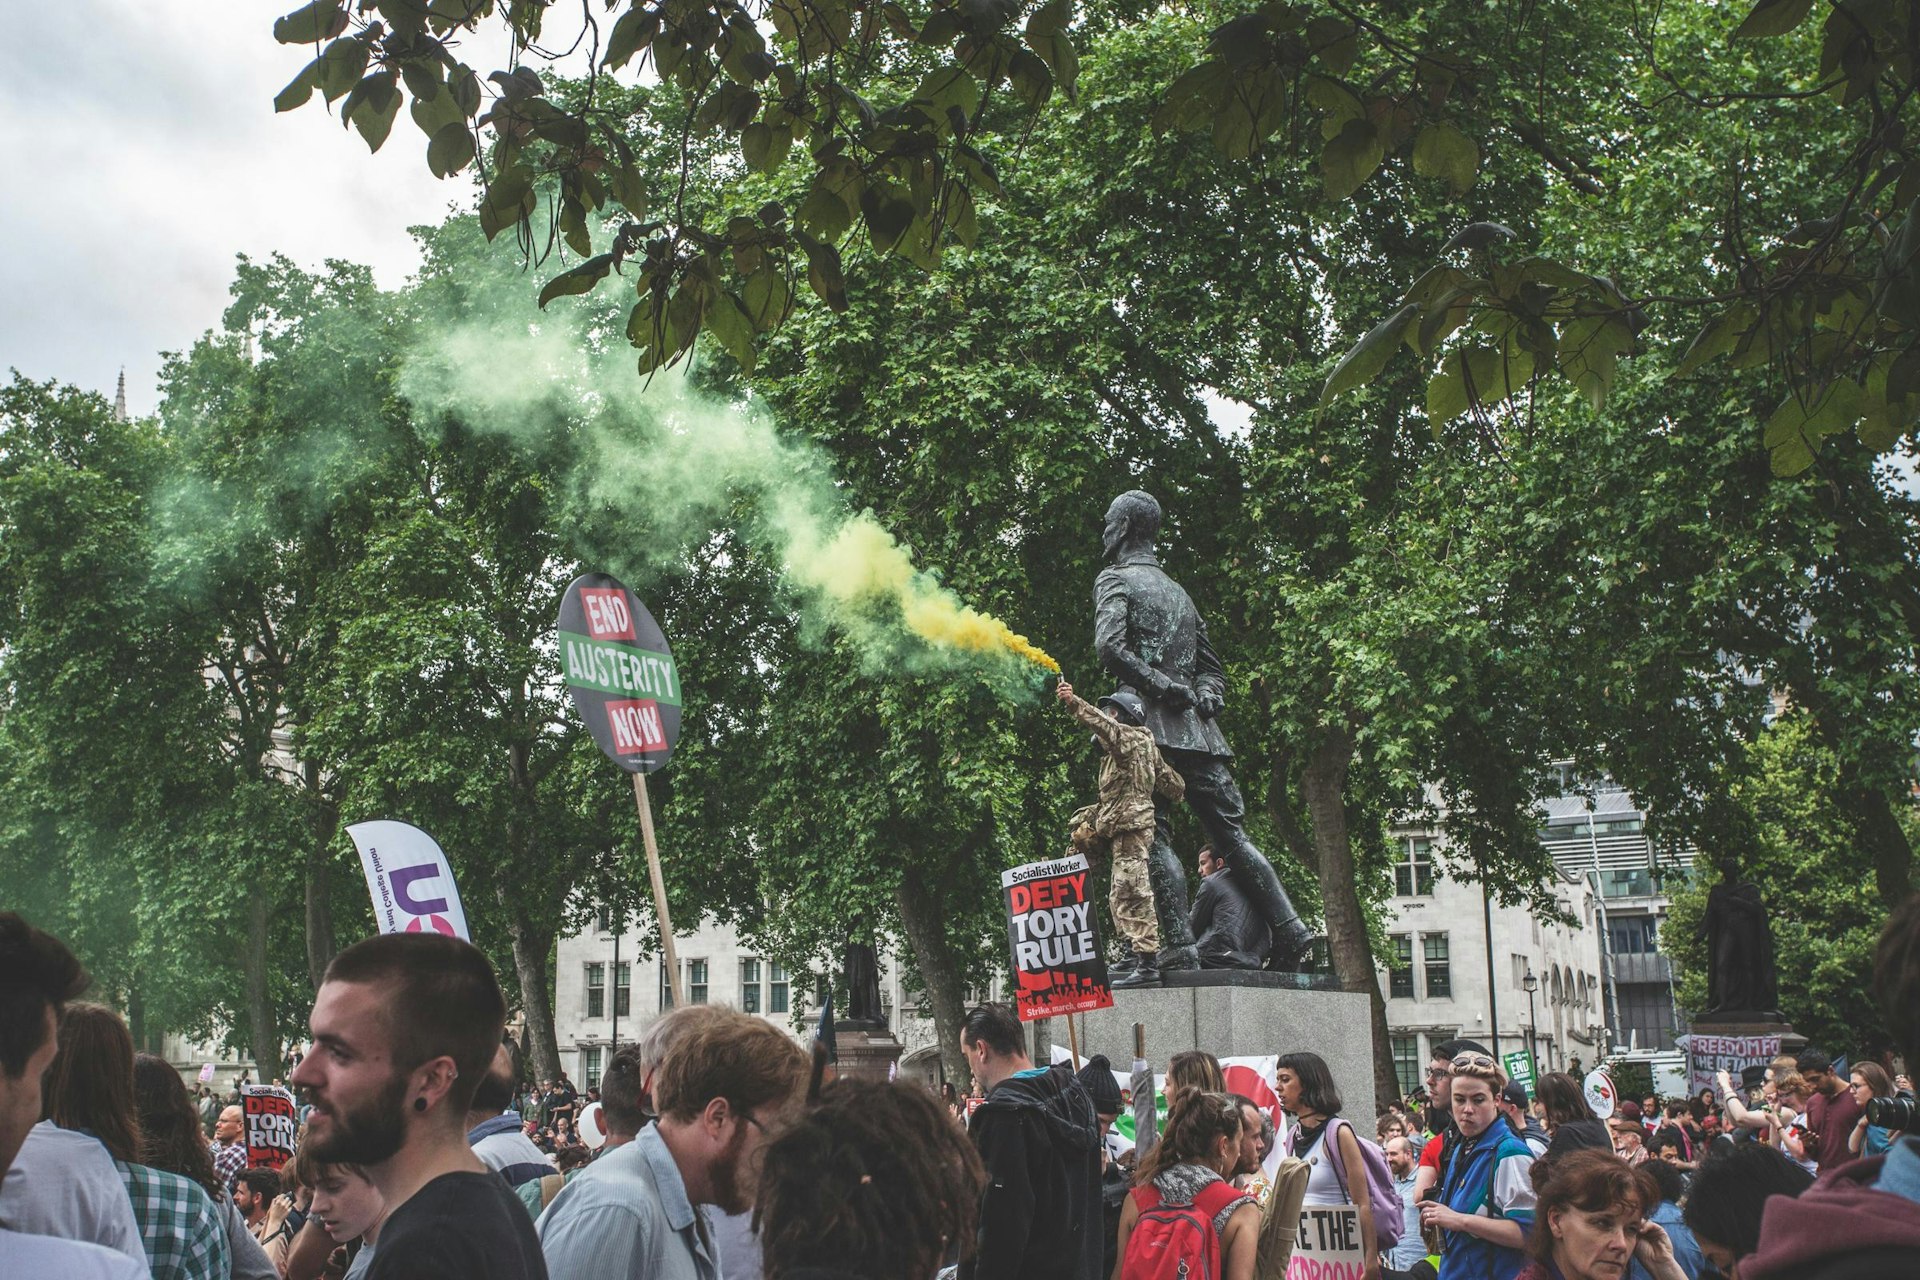 Five things we learned from London’s anti-austerity march